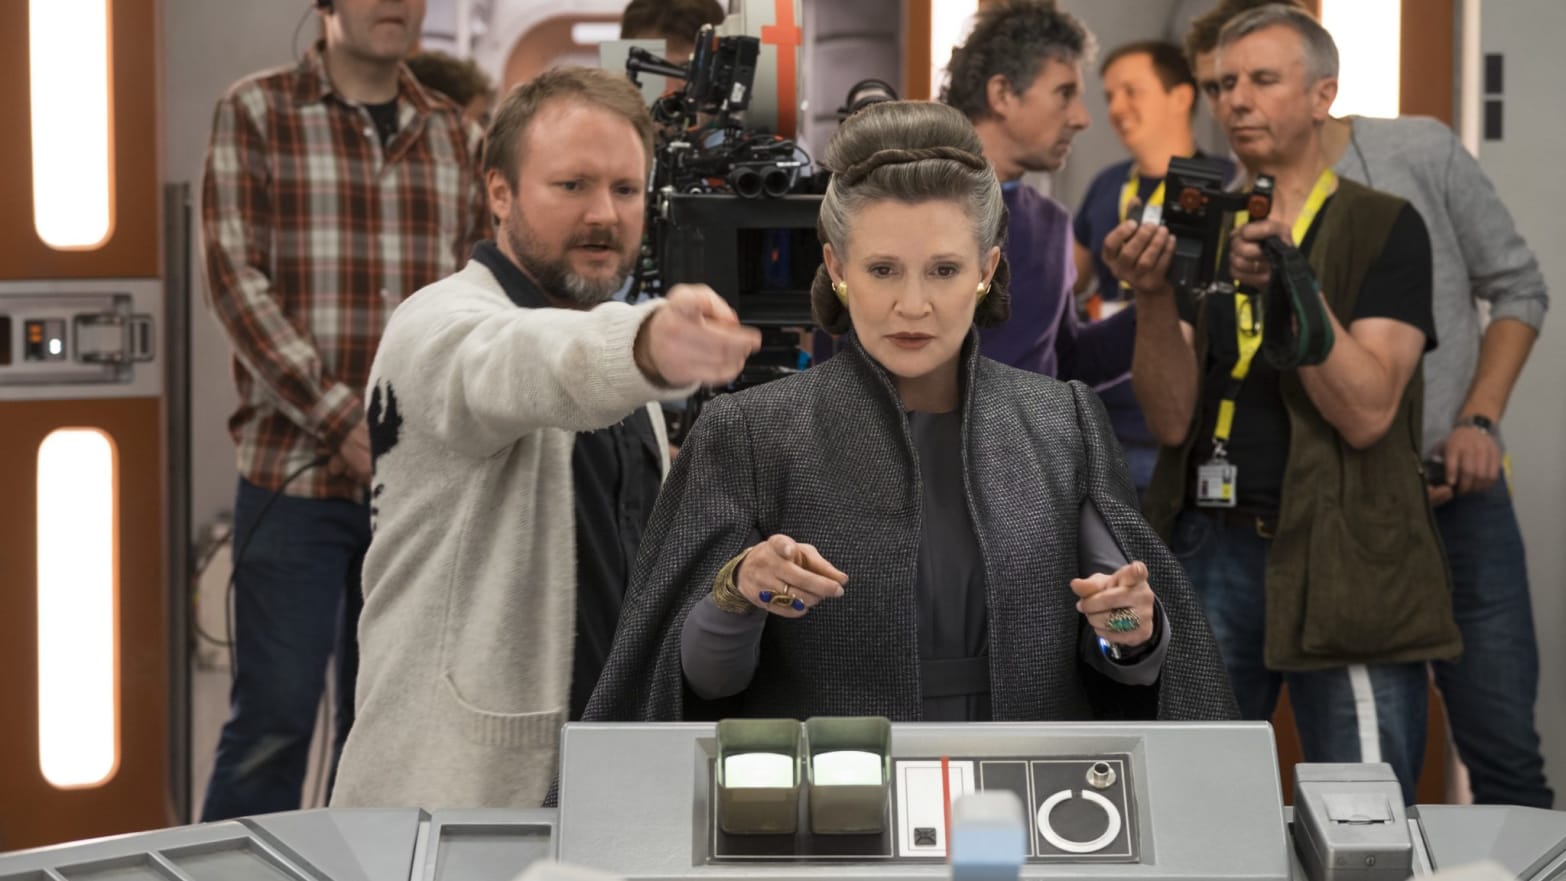 Rian Johnson Looks Back on 'The Last Jedi', Mark Hamill's Reaction to the  Movie, Carrie Fisher's Passing, and More - Star Wars News Net